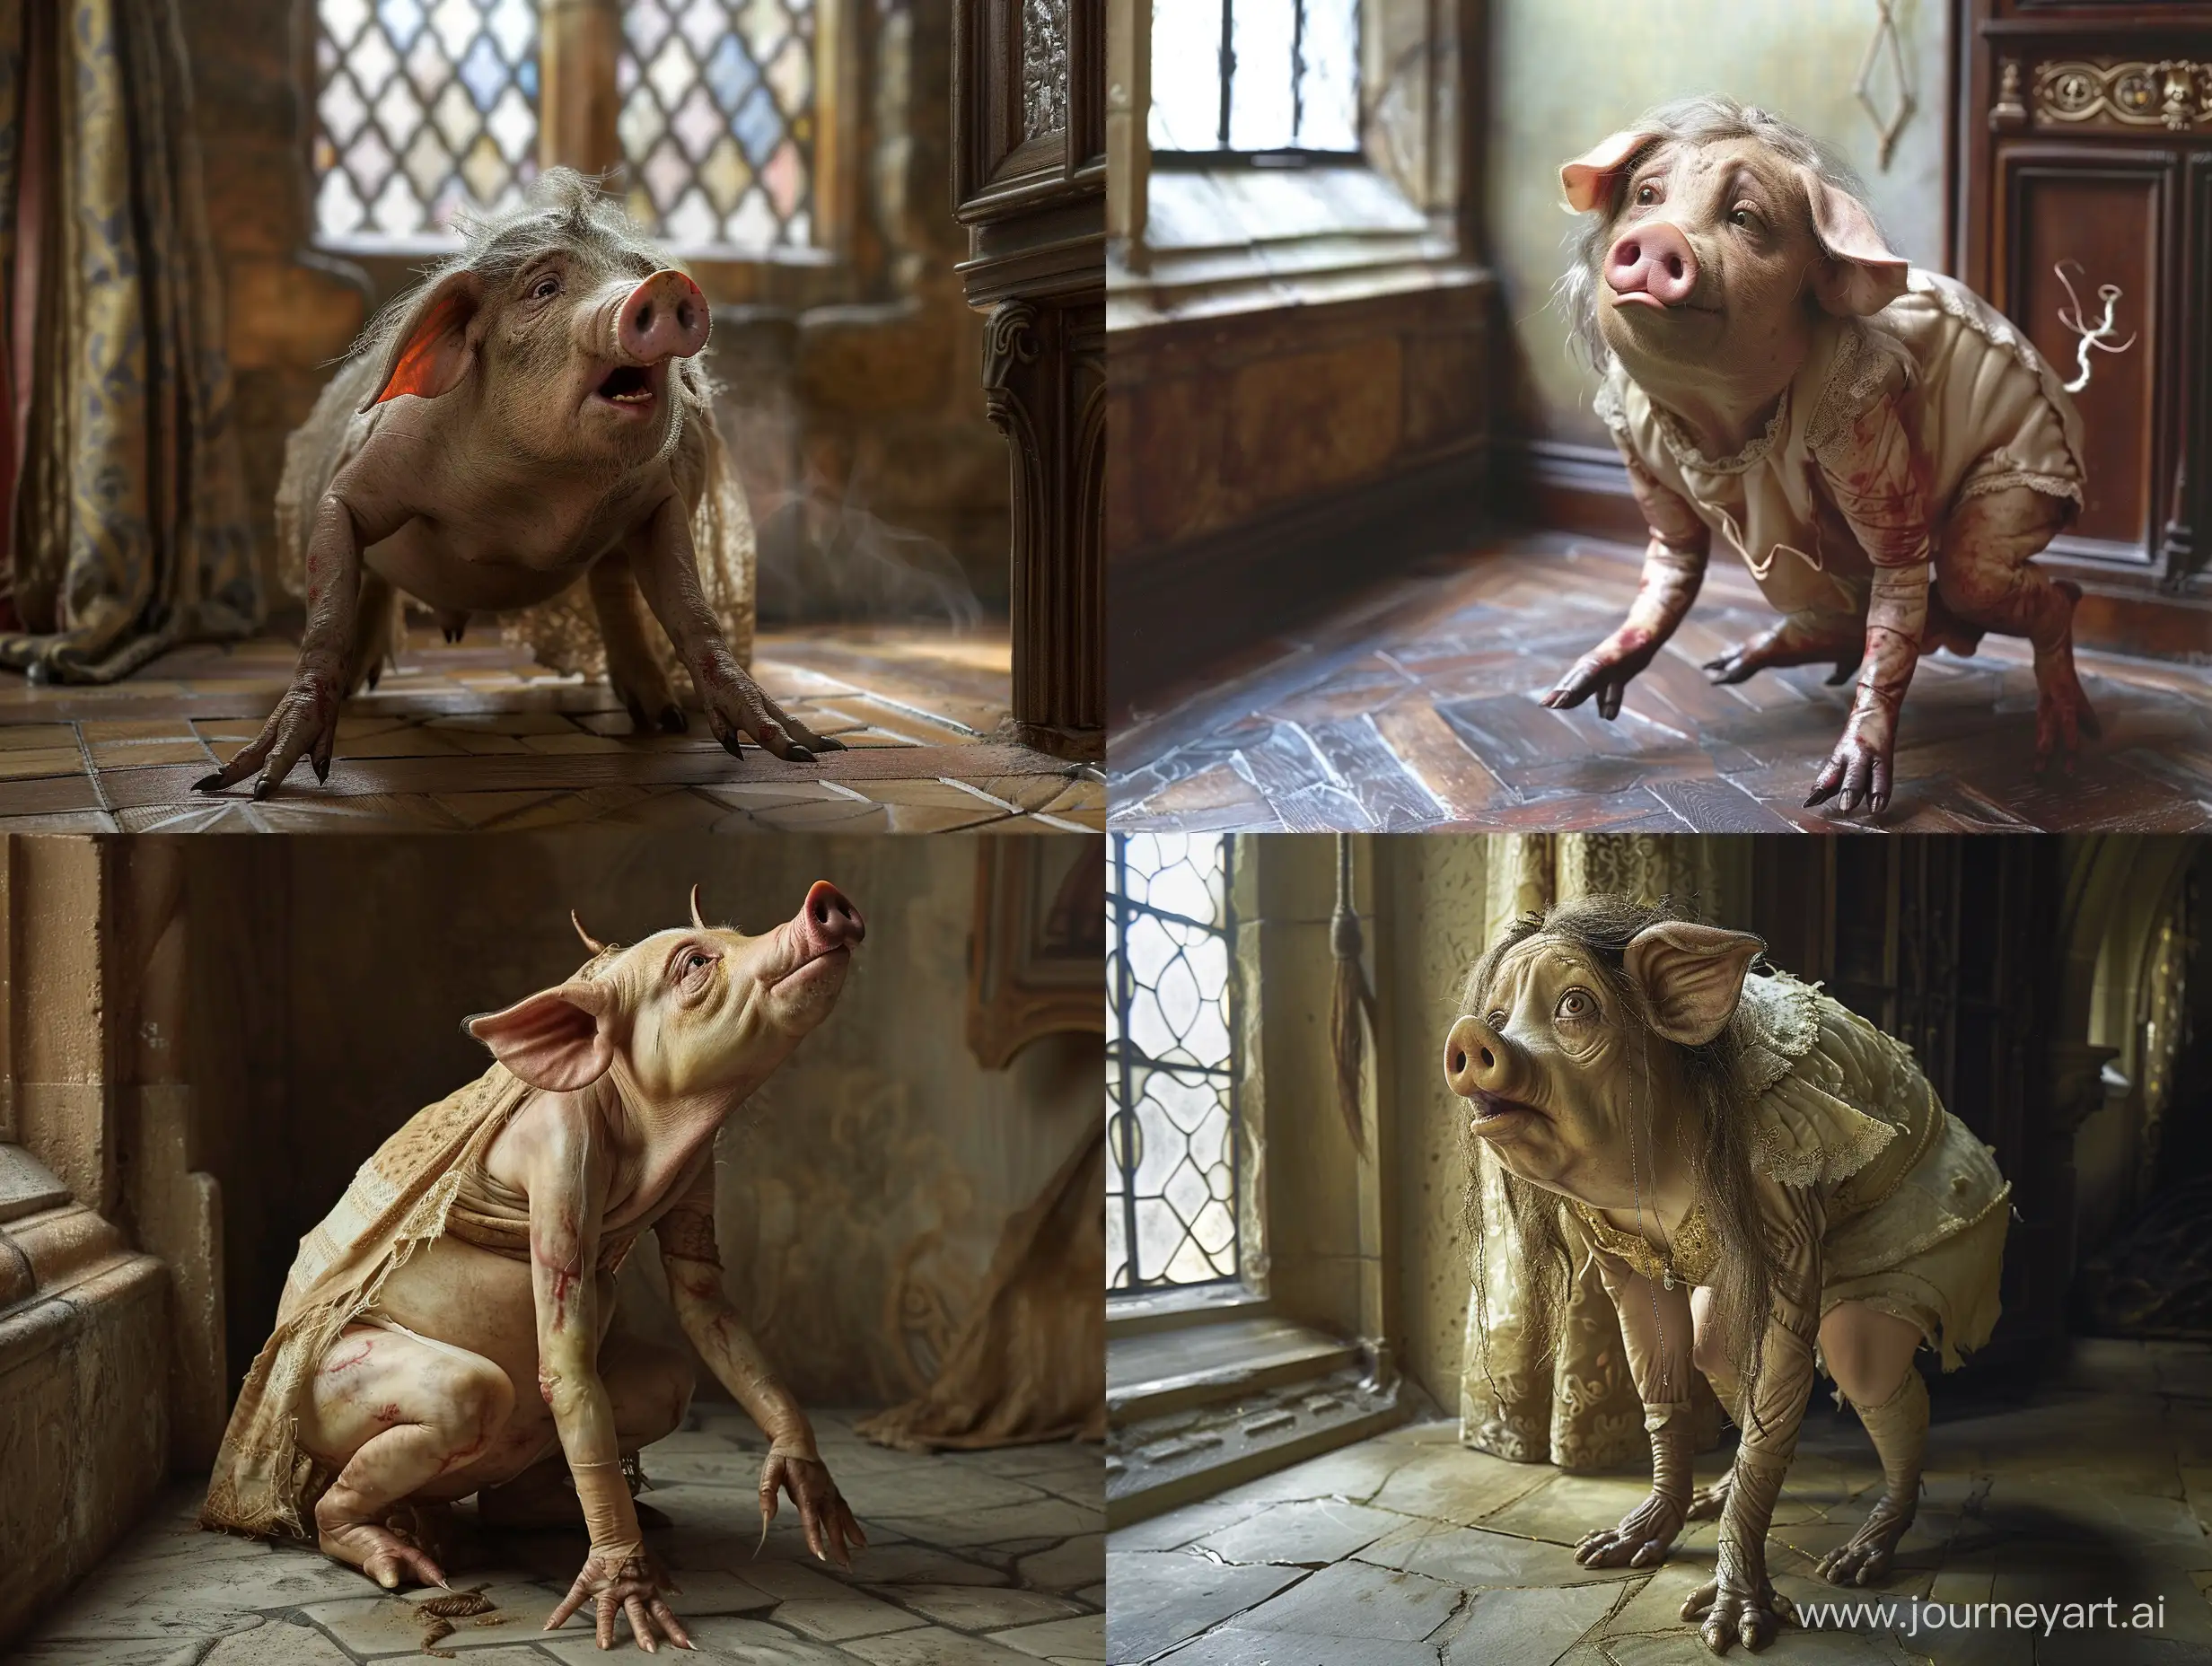 Medieval-Princess-Transformed-into-Pig-in-Confusion-and-Fear